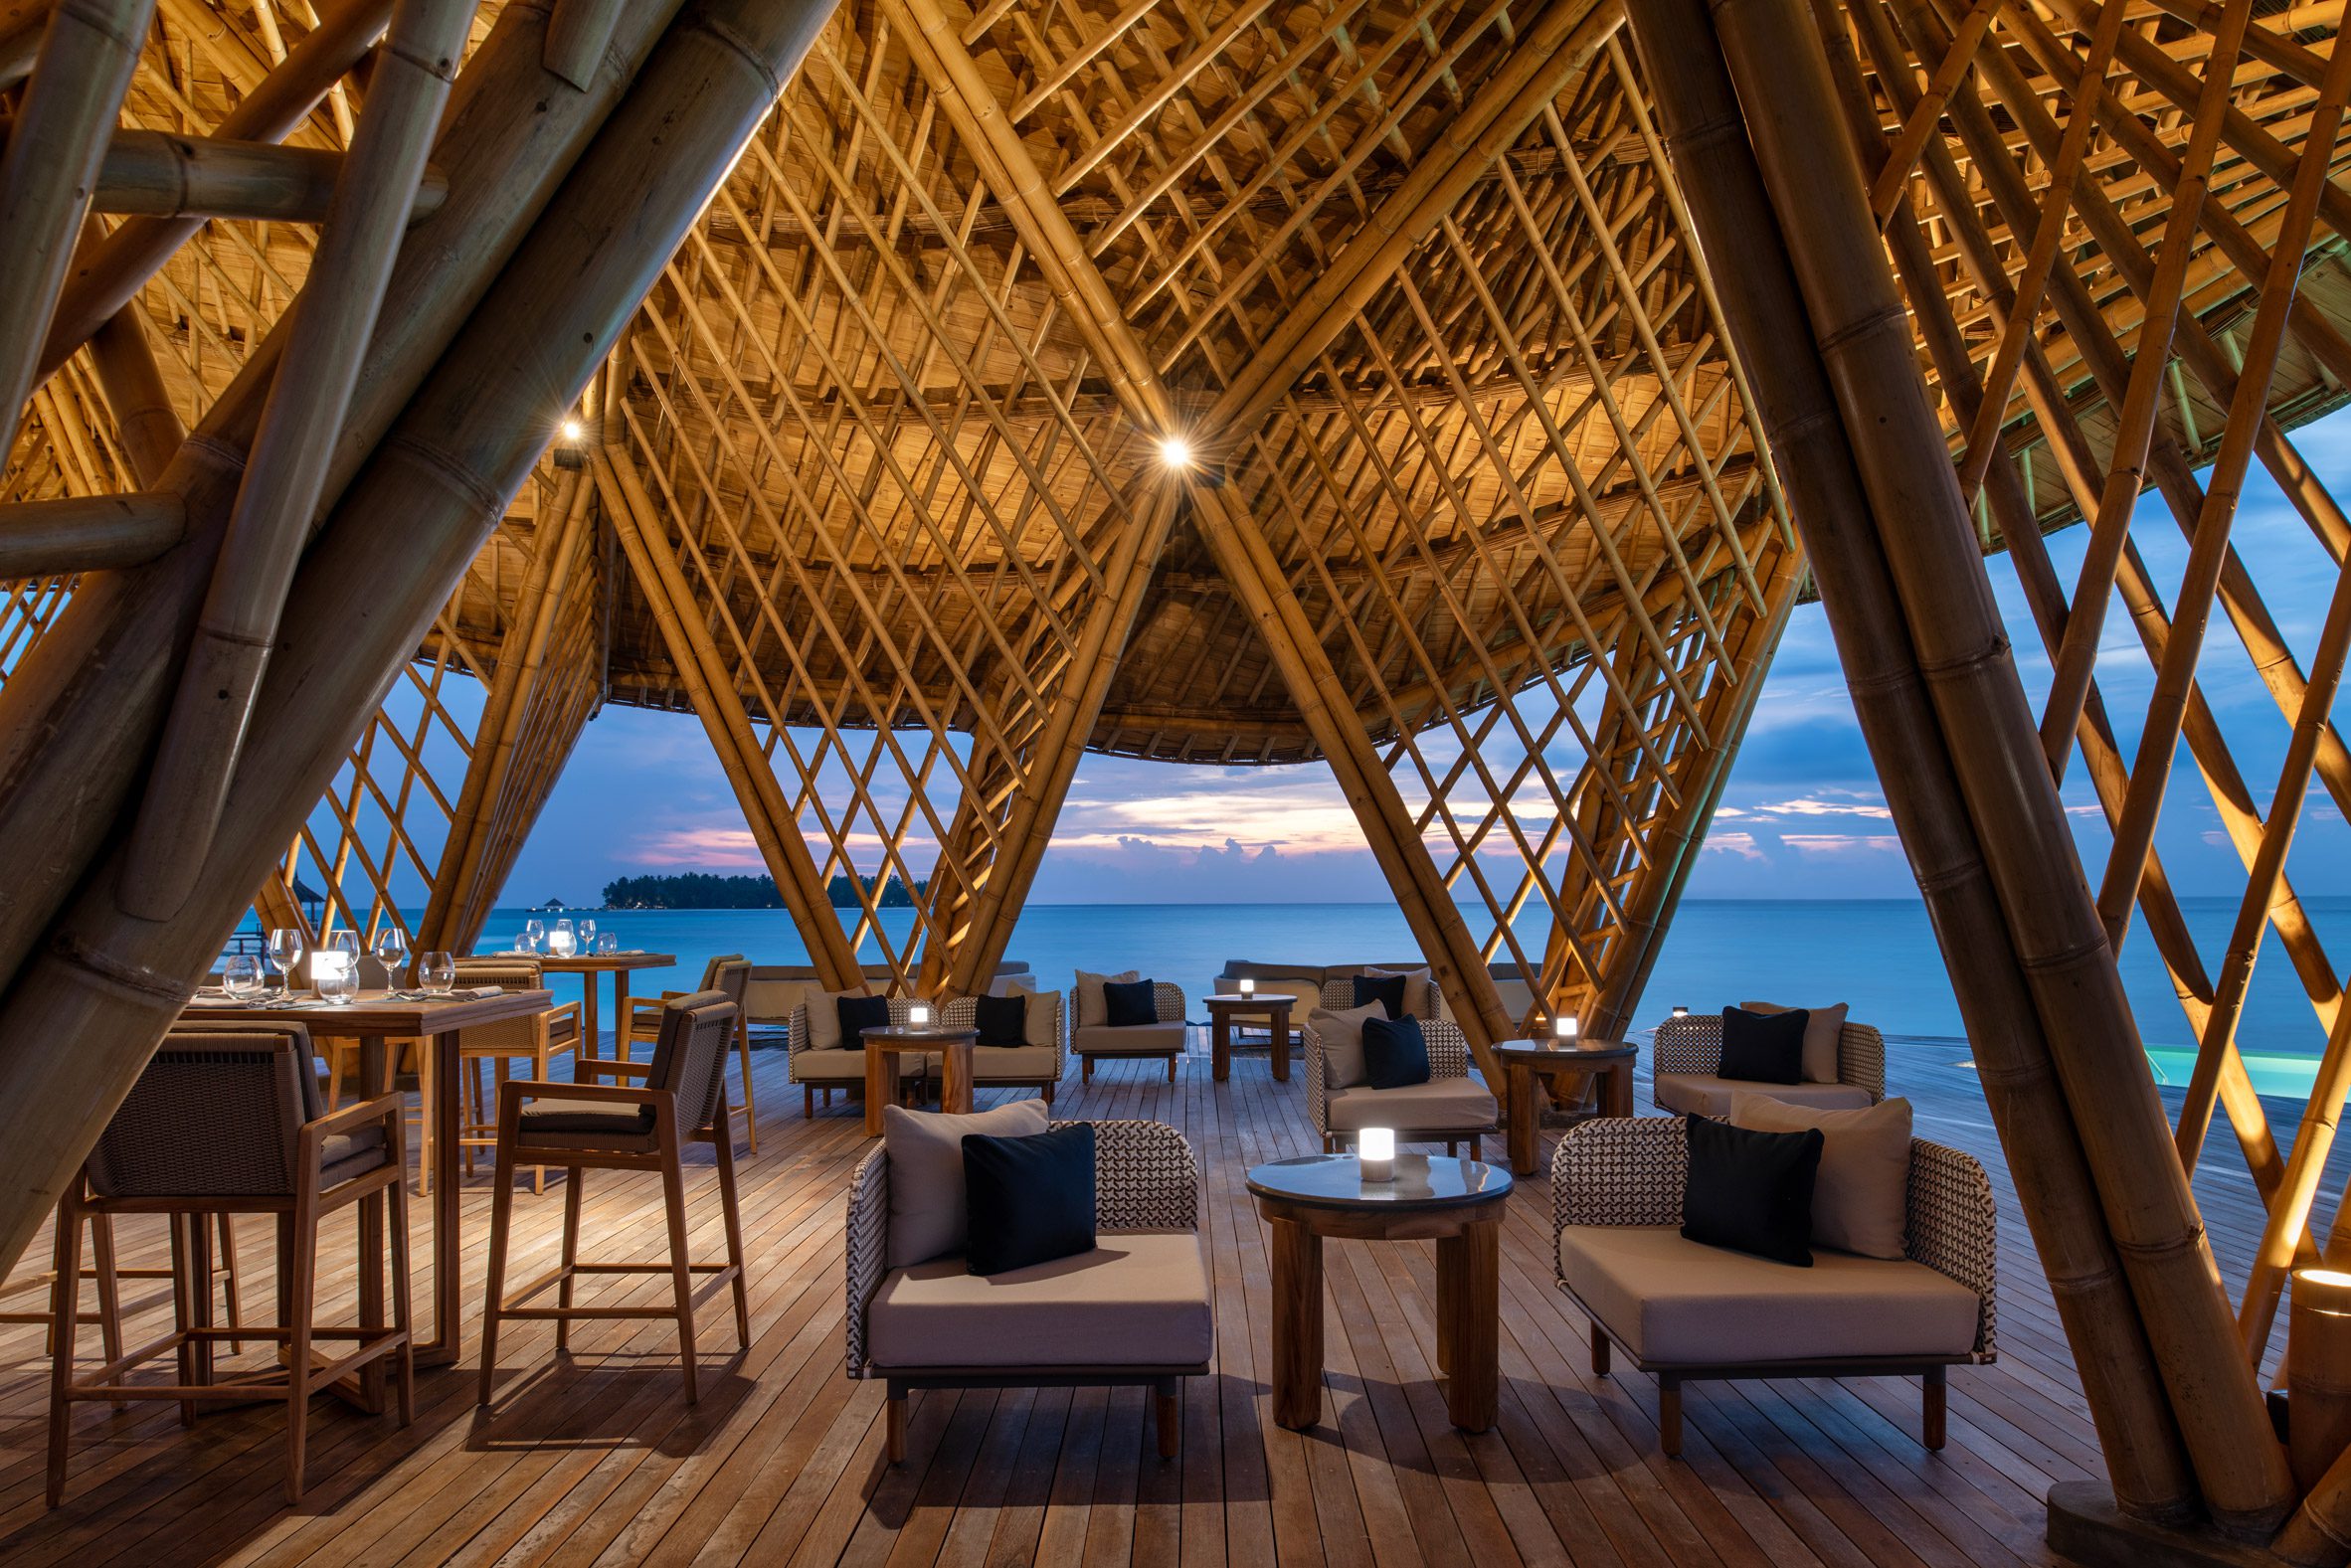 Interior seating area of Overwater Restaurant in the Maldives 